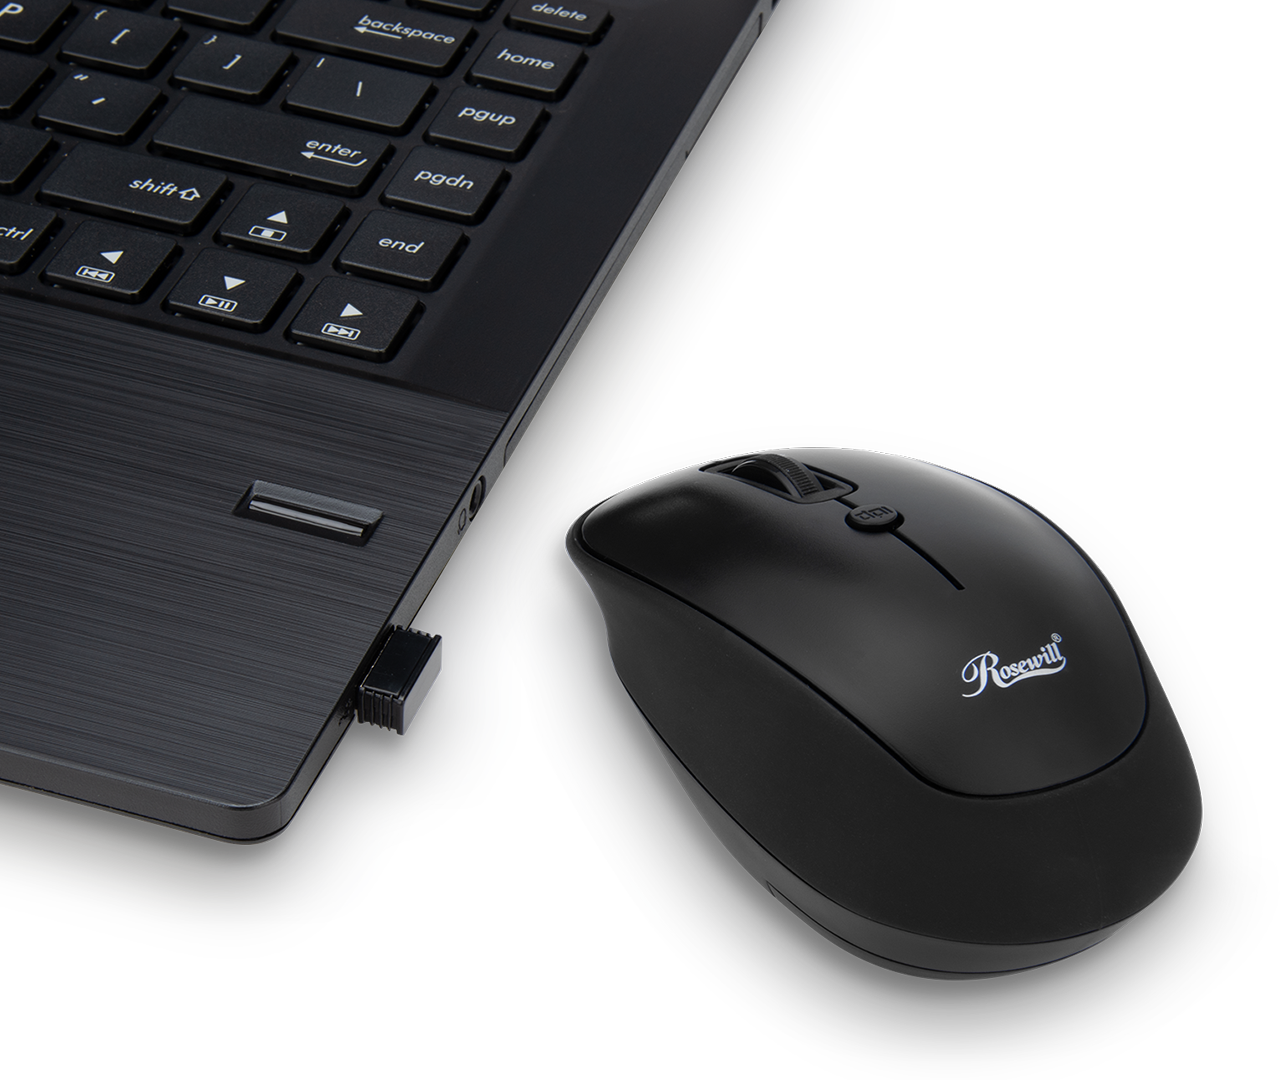 Rosewill Wireless Optical Computer Mouse next to a laptop that it's receiver is plugged into. There is a graphic and text that indicates: Sweat-Resistant Finish